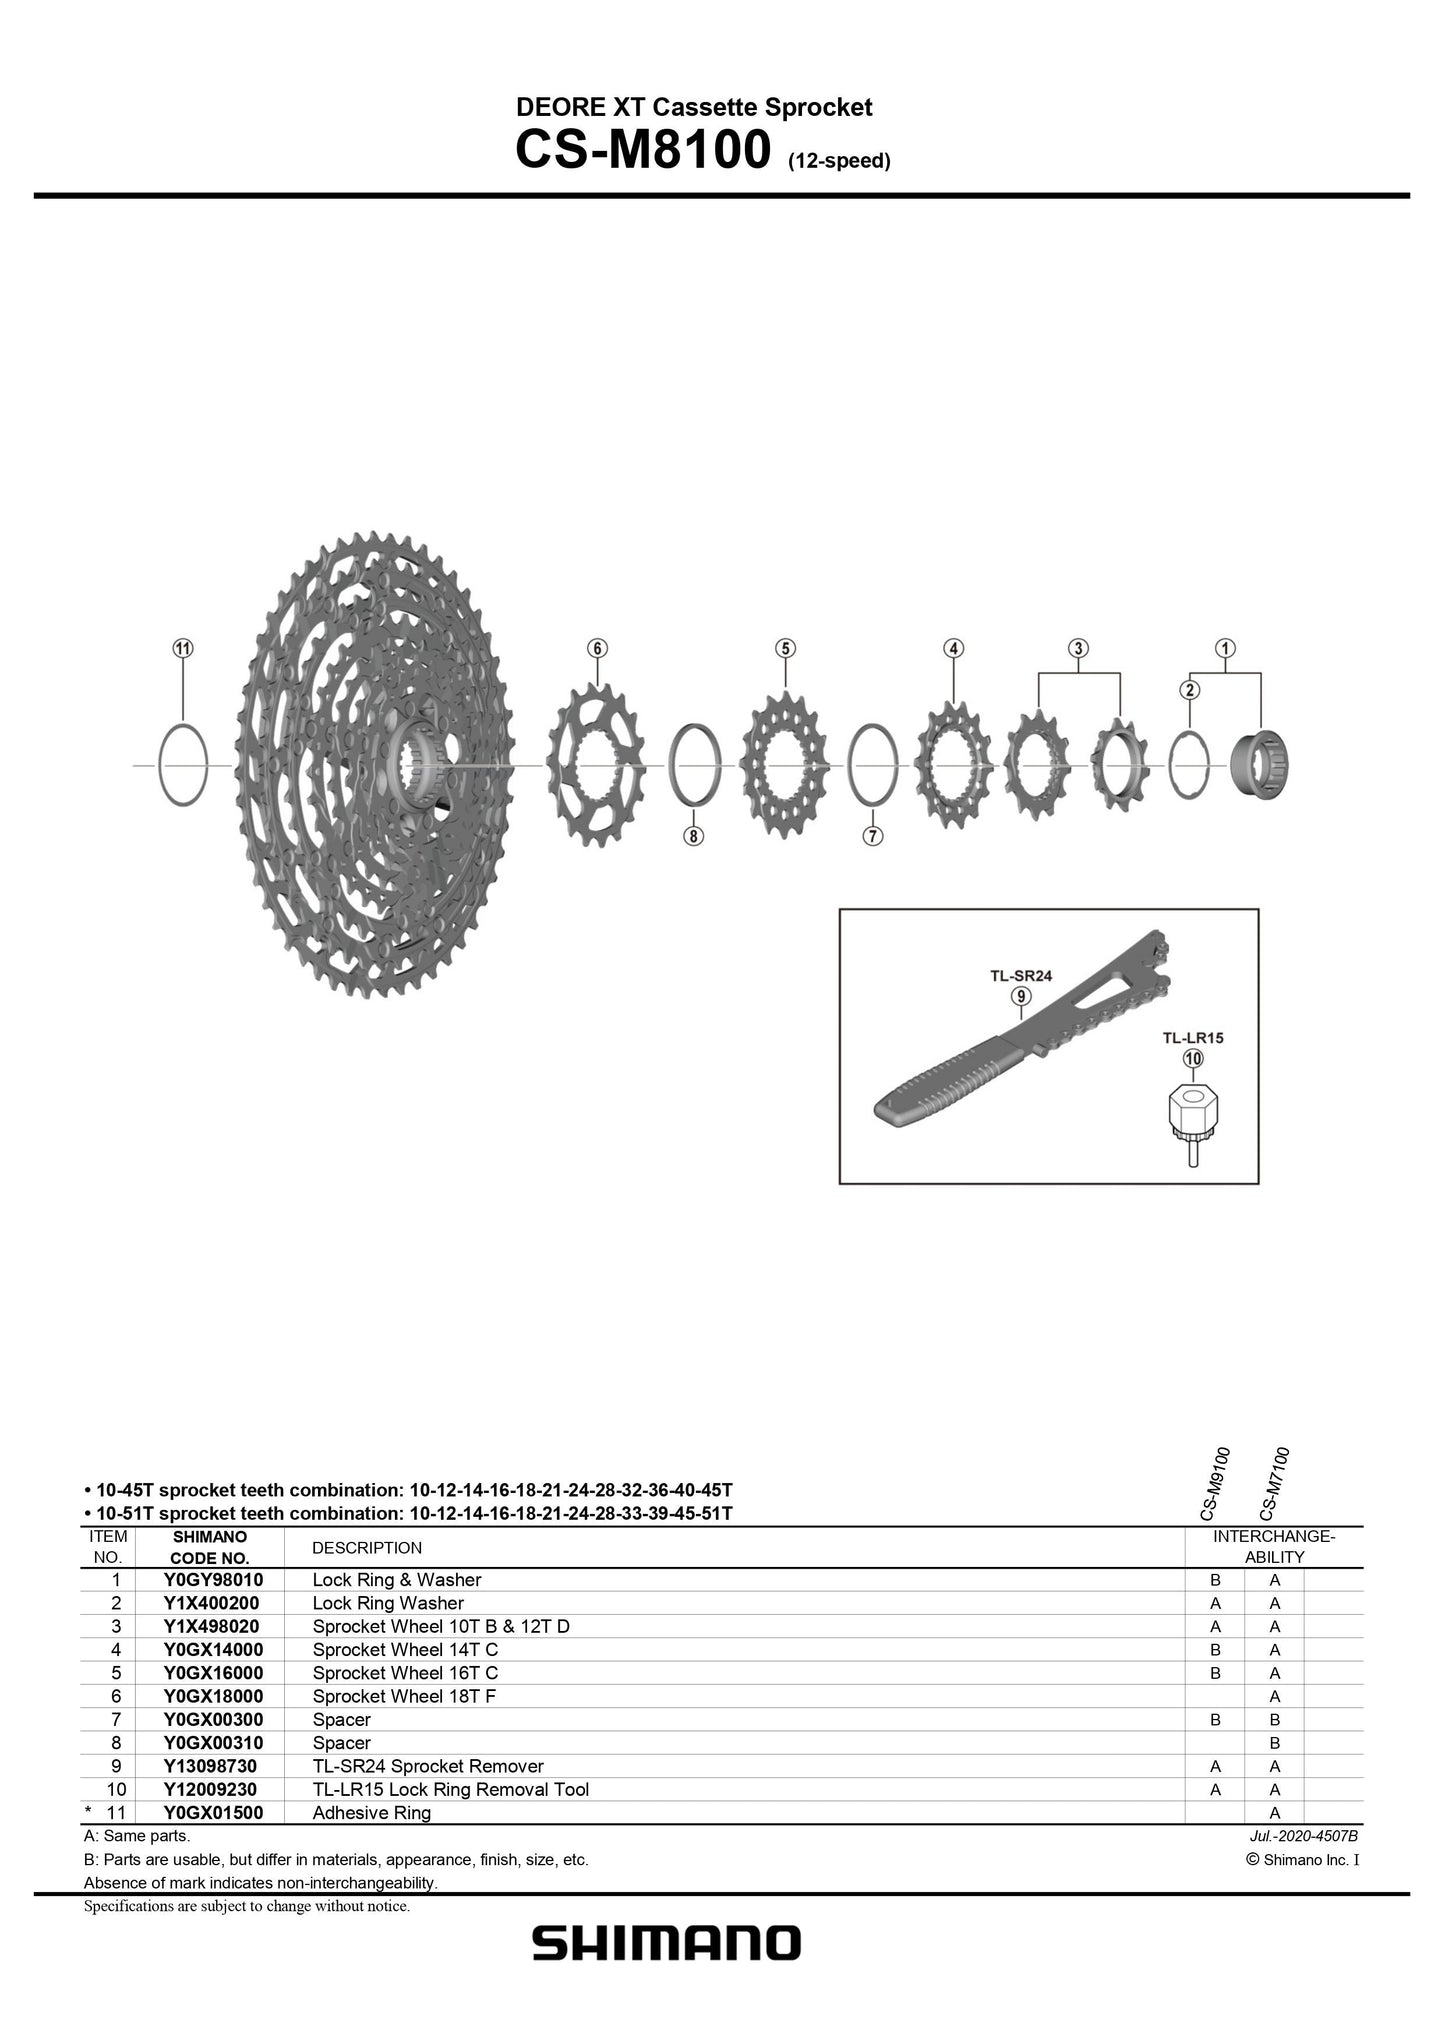 SHIMANO Deore CS-M8100 Cassette Sprocket Adhesive Ring - (12-Speed) - Y0GX01500-Pit Crew Cycles